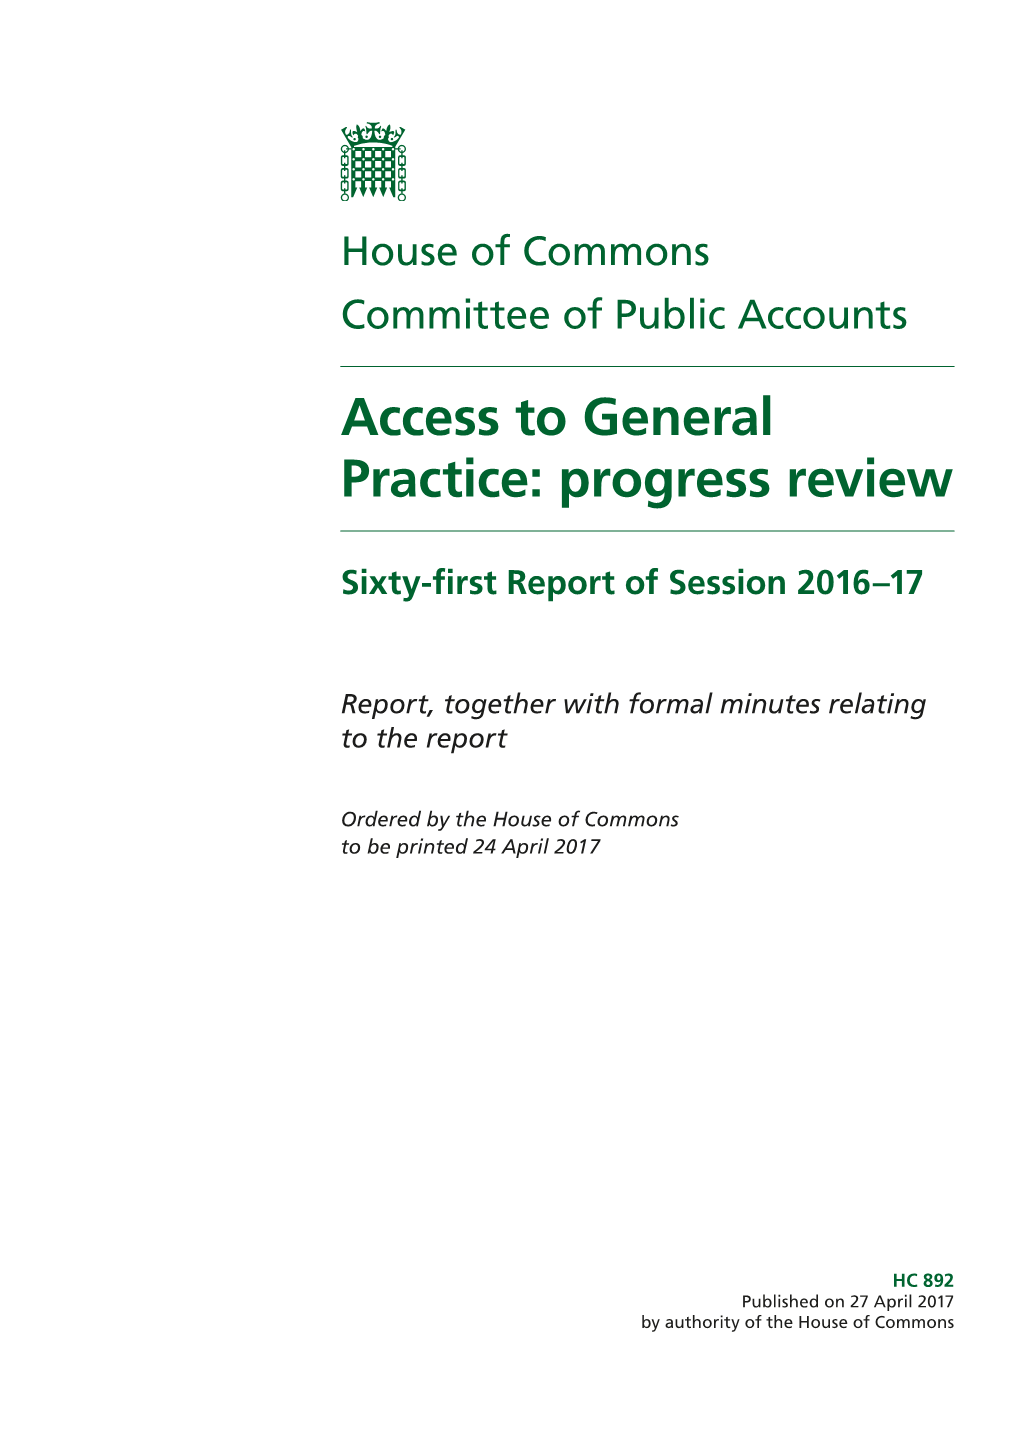 Access to General Practice: Progress Review